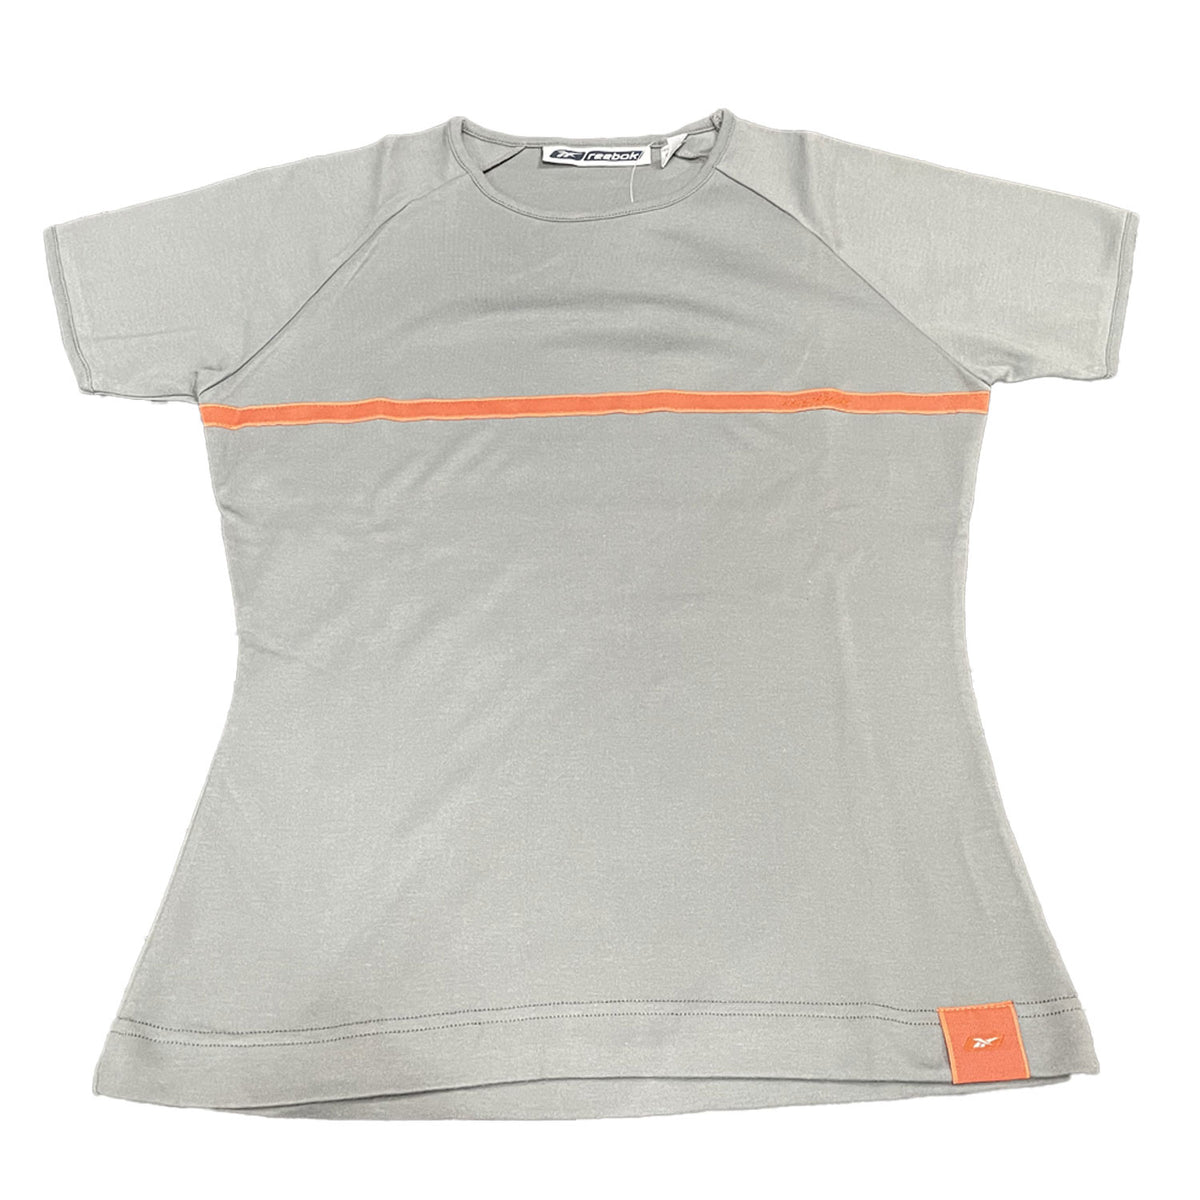 Reebok Womens Lined Freestyle T-Shirt 5 - RRP £14.99